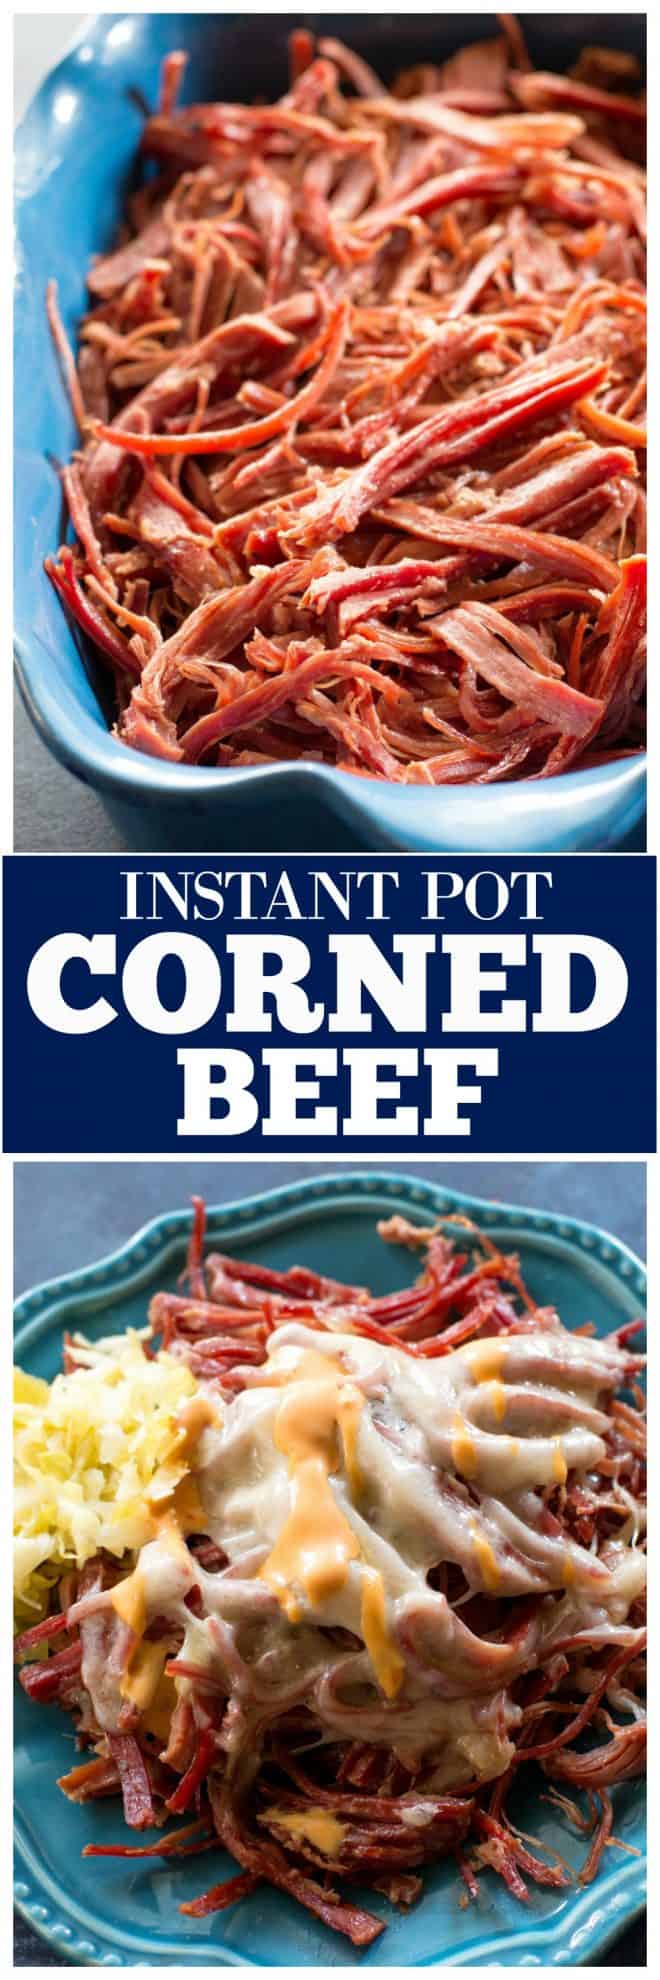 Instant Pot Corned Beef - The Girl Who Ate Everything